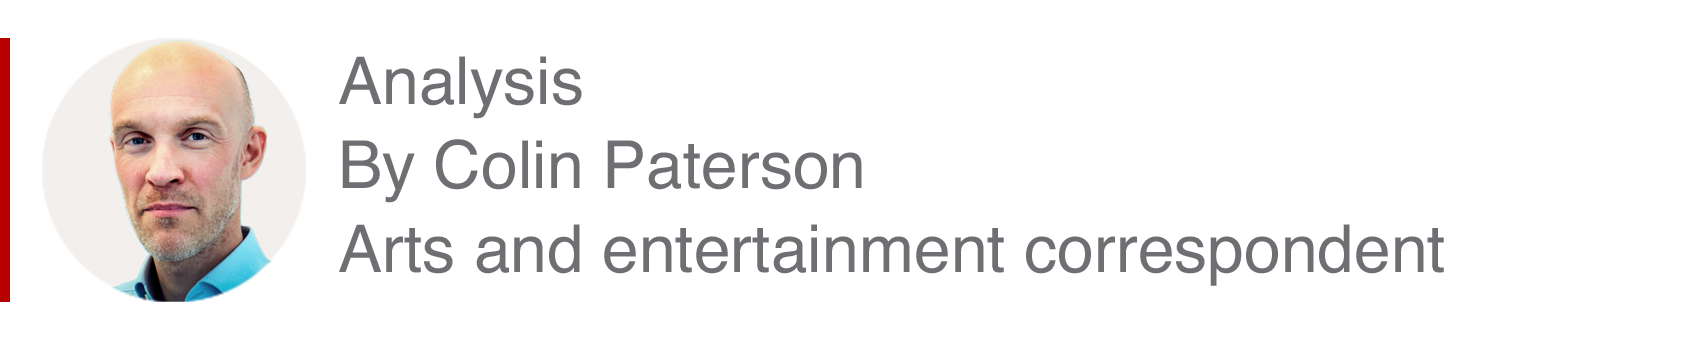 Analysis box by Colin Paterson, arts and entertainment correspondent